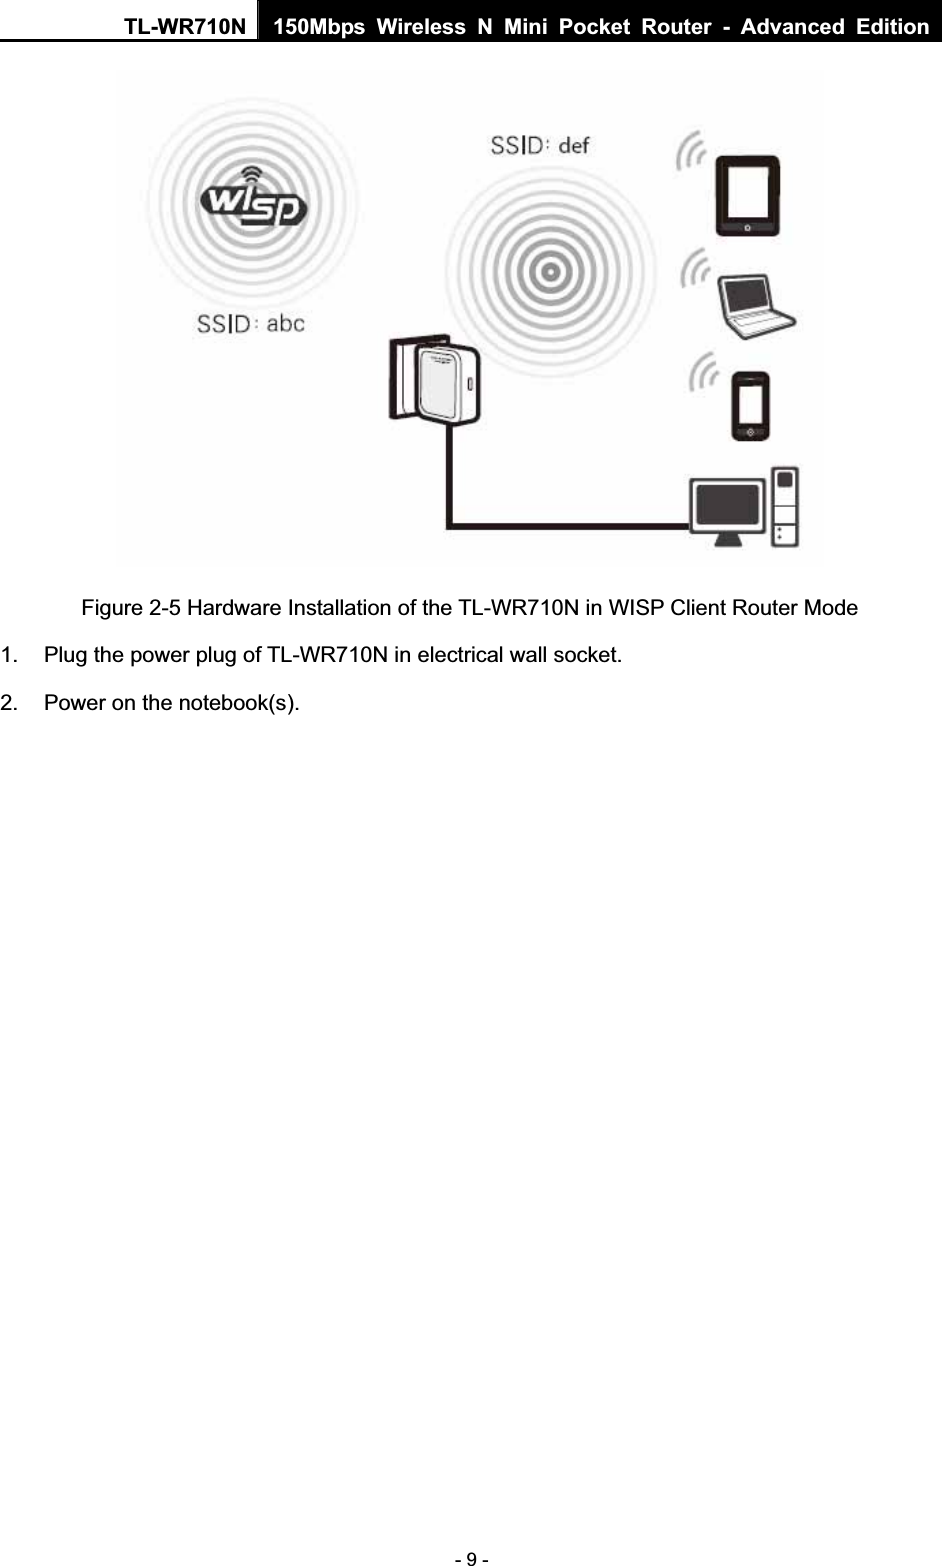 TL-WR710N  150Mbps Wireless N Mini Pocket Router - Advanced Edition- 9 - Figure 2-5 Hardware Installation of the TL-WR710N in WISP Client Router Mode 1.  Plug the power plug of TL-WR710N in electrical wall socket. 2.  Power on the notebook(s). 